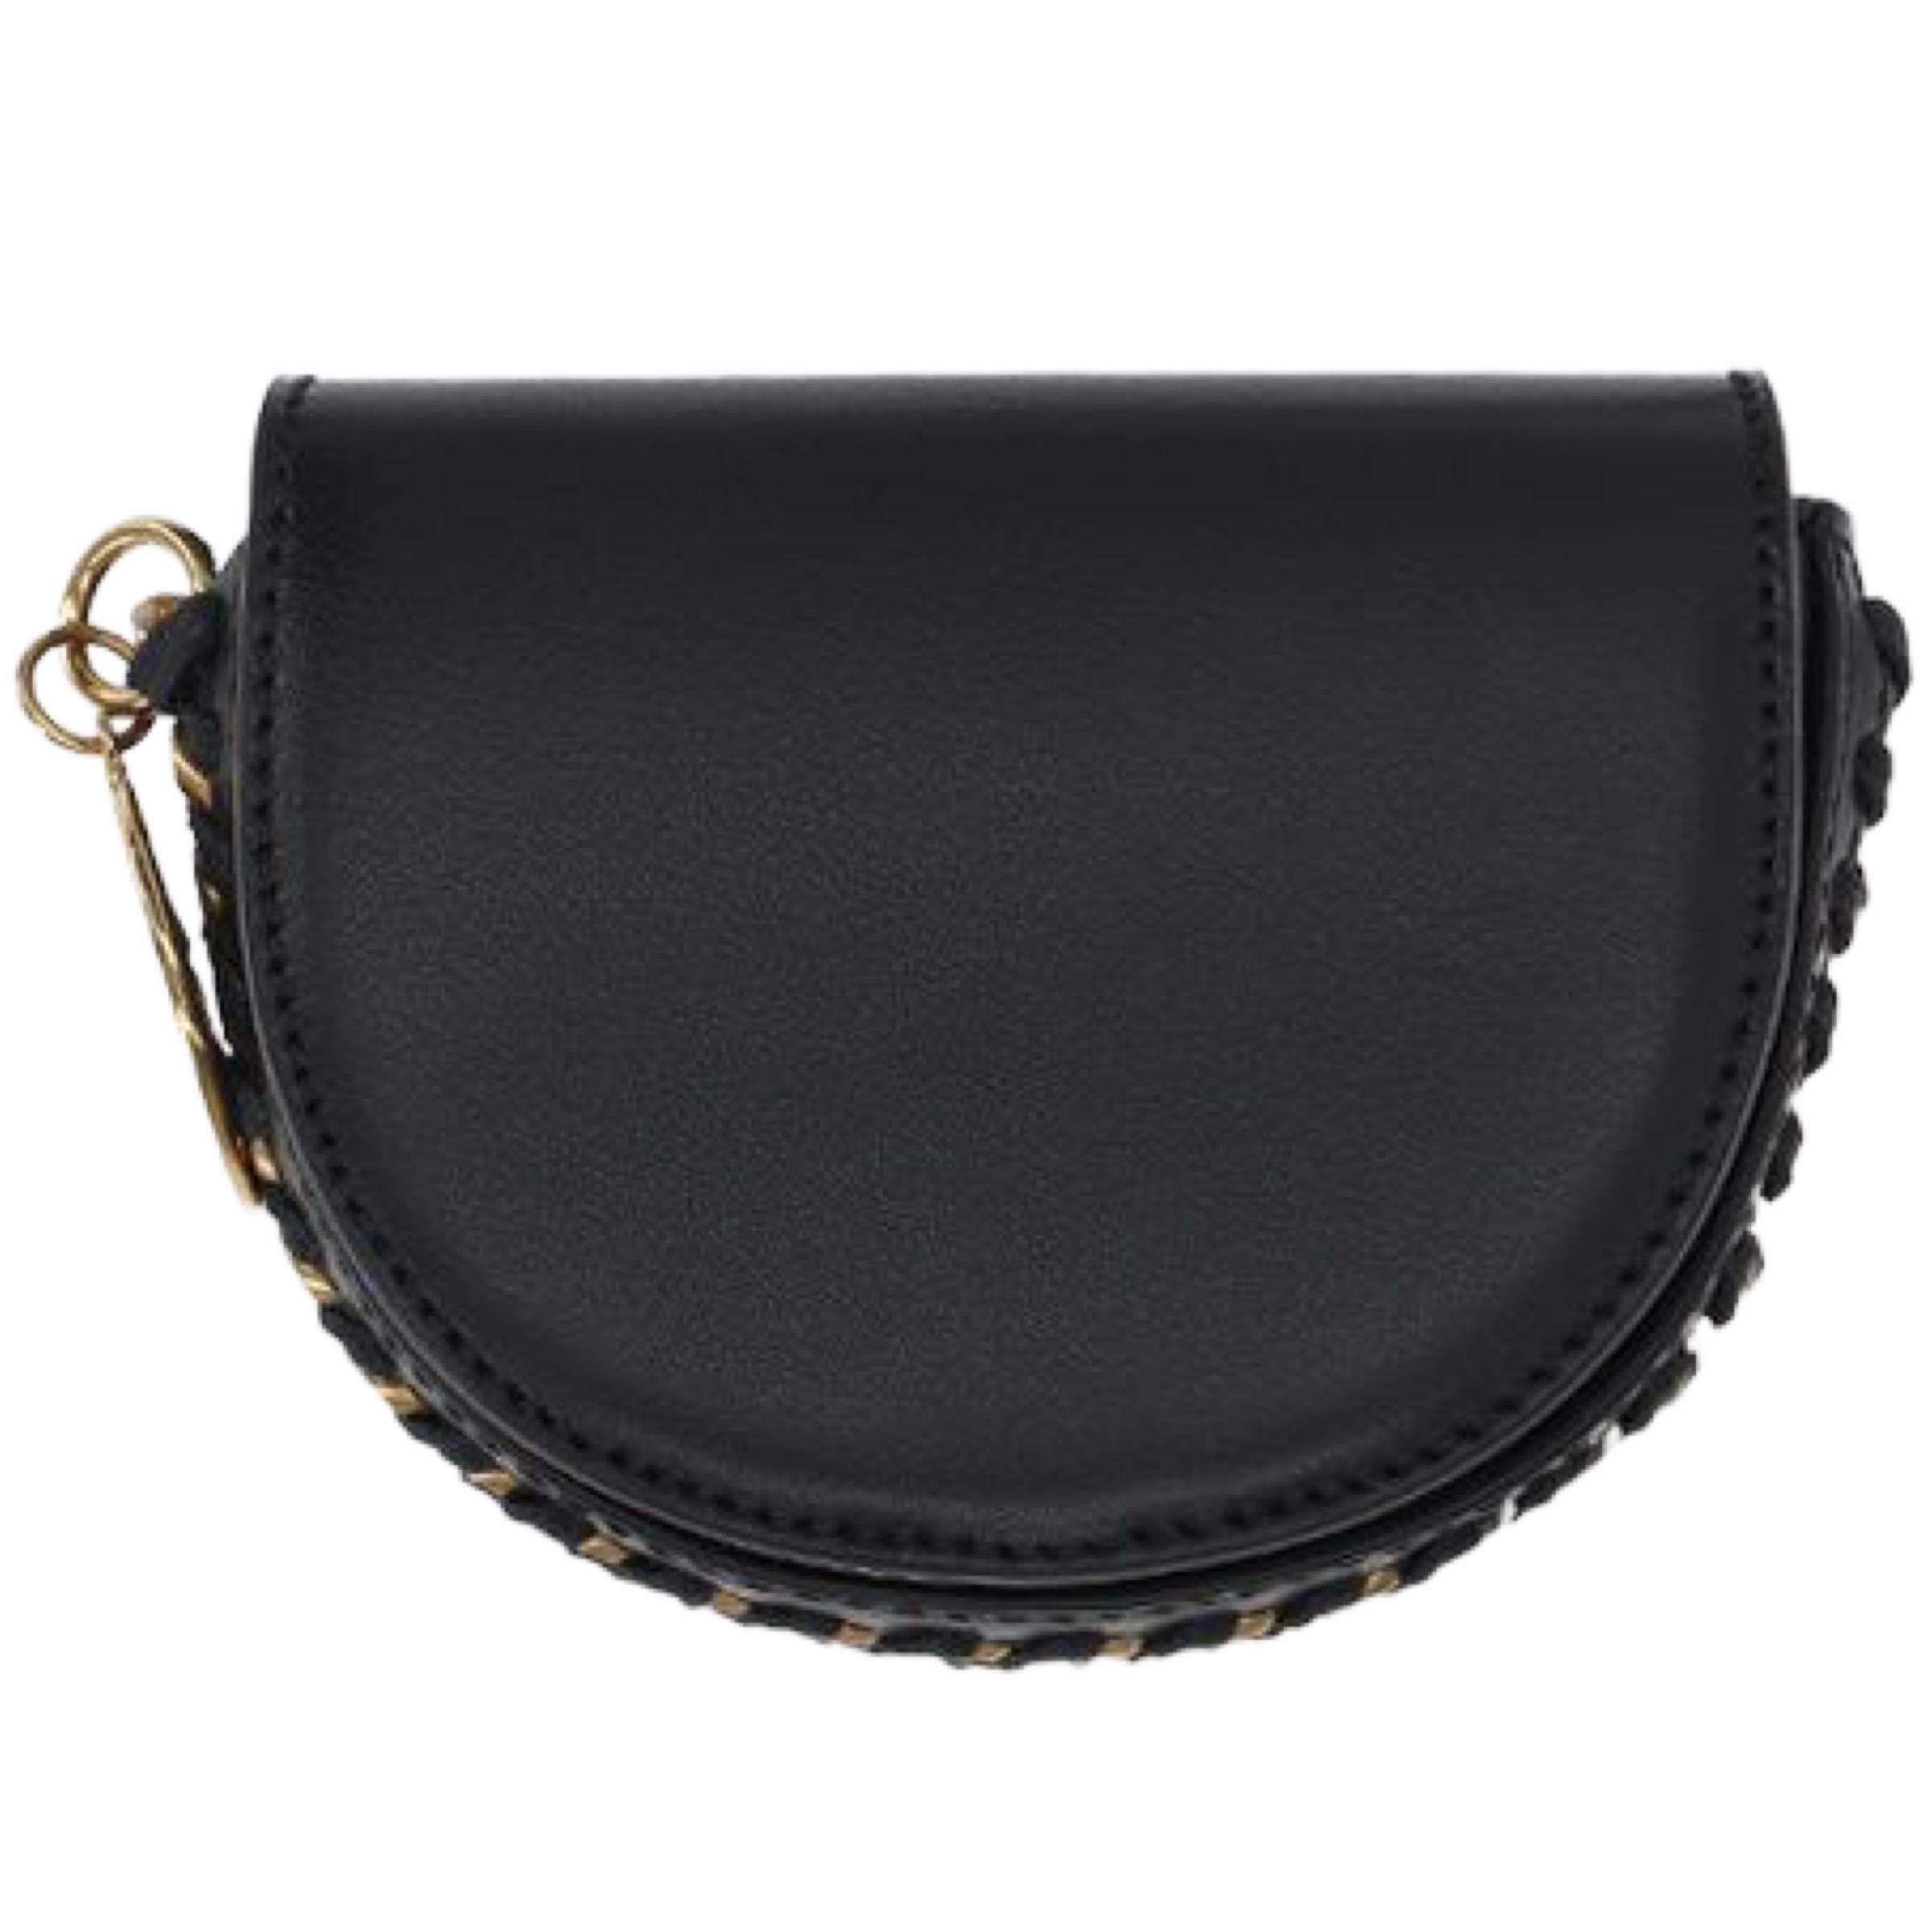 New Stella McCartney Black Frayme Mini Leather Crossbody Bag

Authenticity Guaranteed

DETAILS
Brand: Stella McCartney
Condition: Brand new
Gender: Women
Category: Crossbody bag
Color: Black
Material: Leather
Gold-tone hardware
Bag chain
Chunky